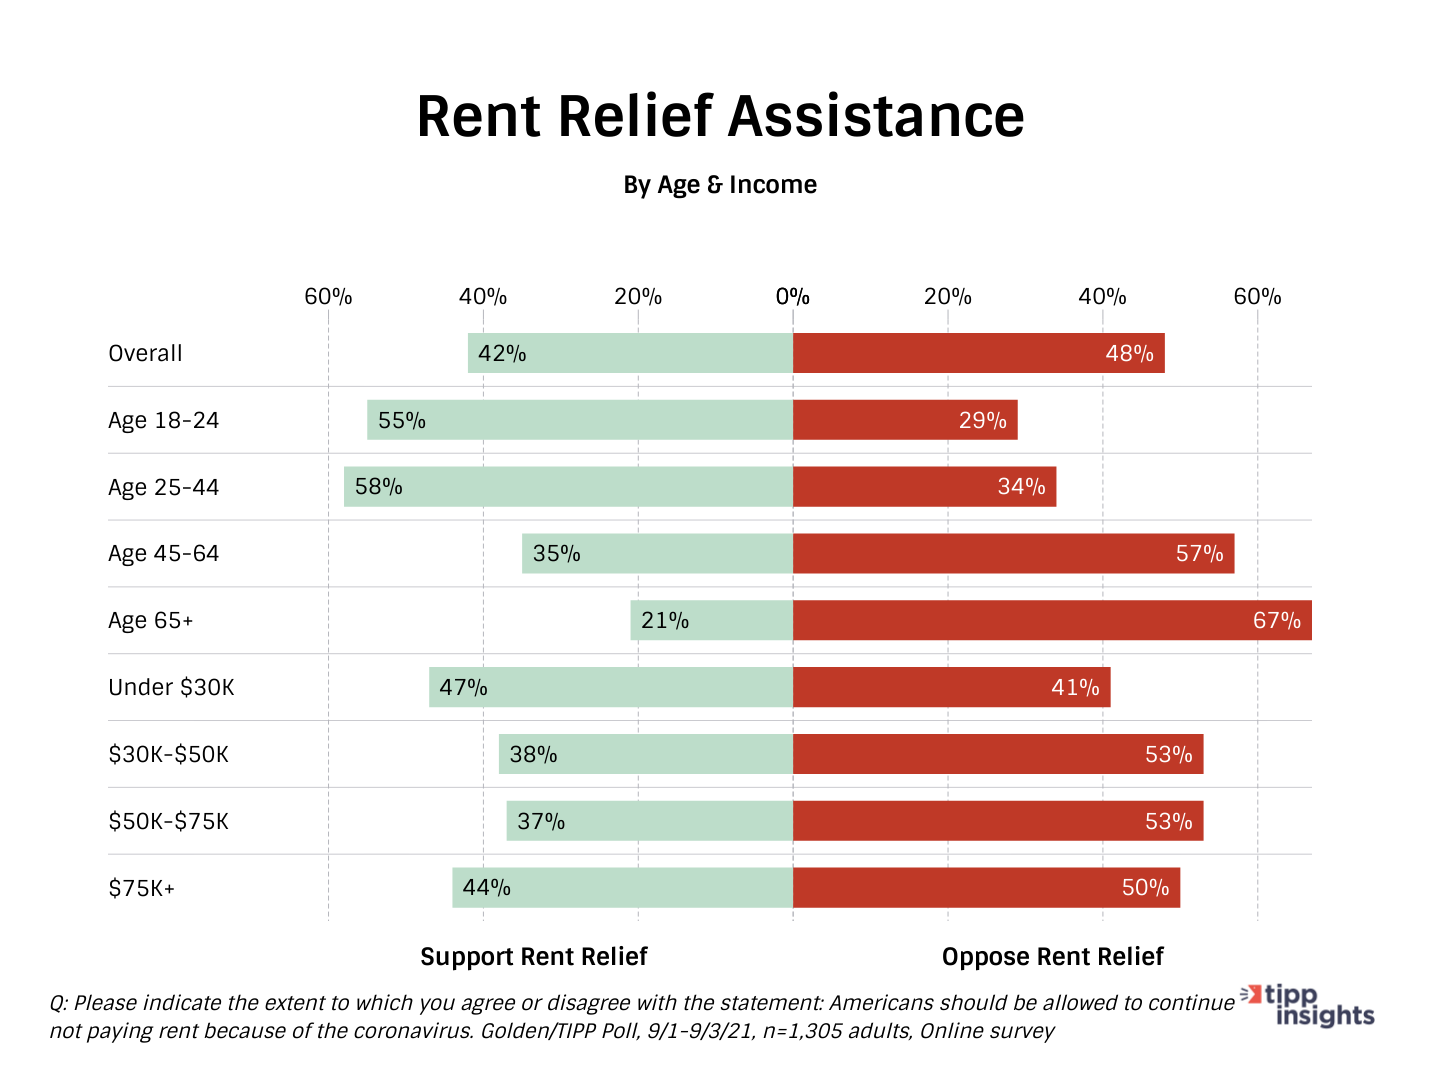 TIPP/Golden Poll results: Americans in support or opposition of rent relief assistance